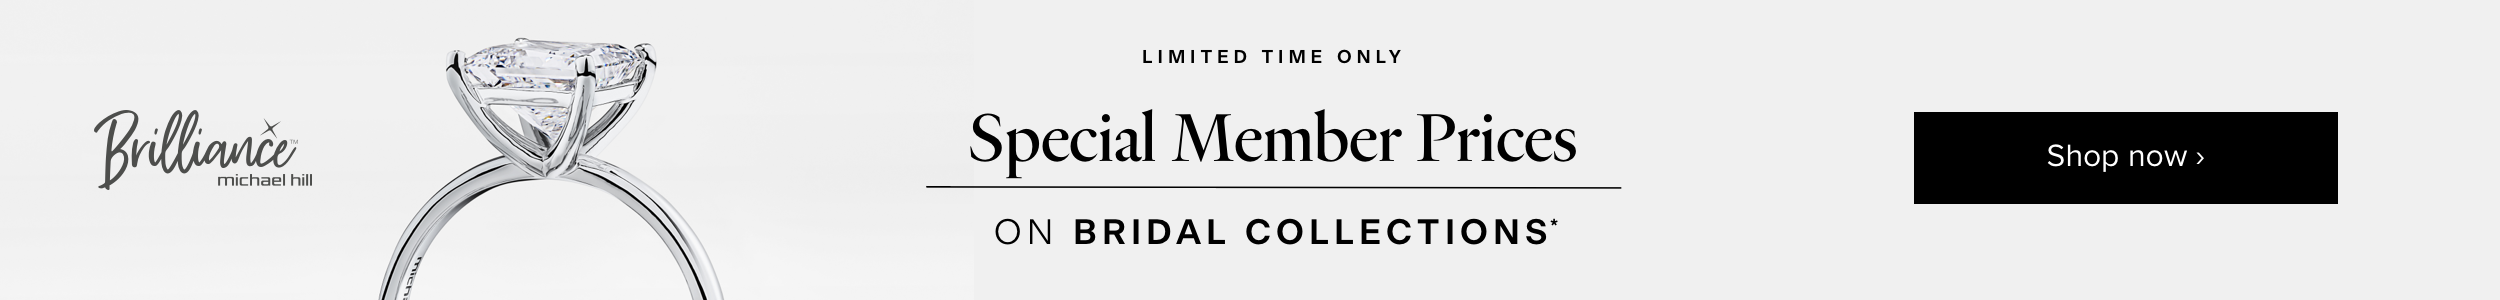 Brilliance member price on selected bridal collections